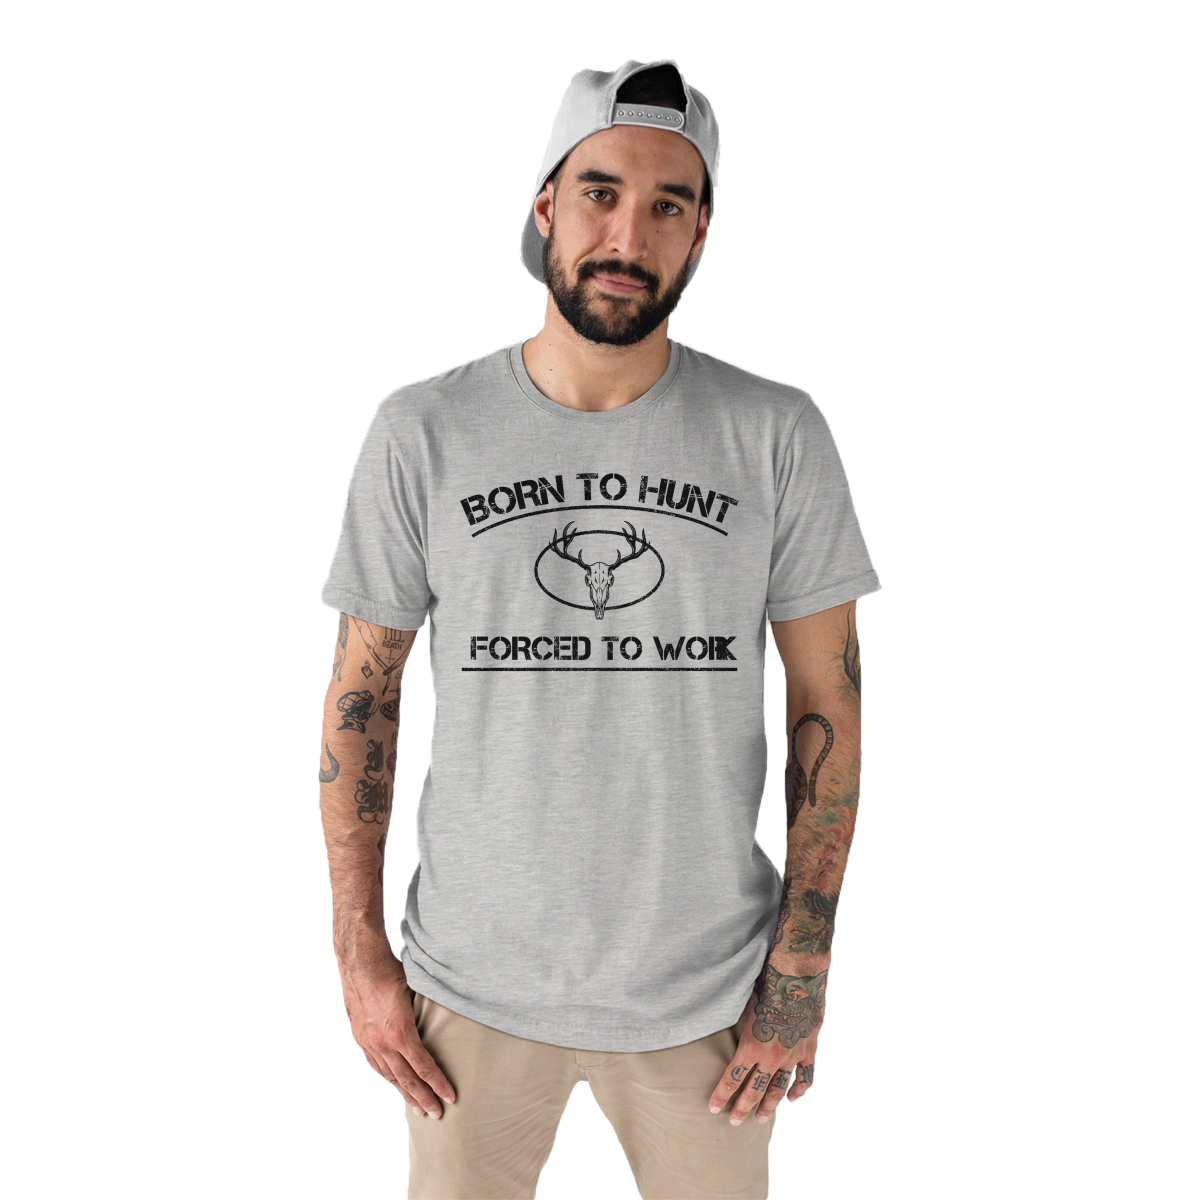 Born To Hunt Forced To Work Men's T-shirt | Gray